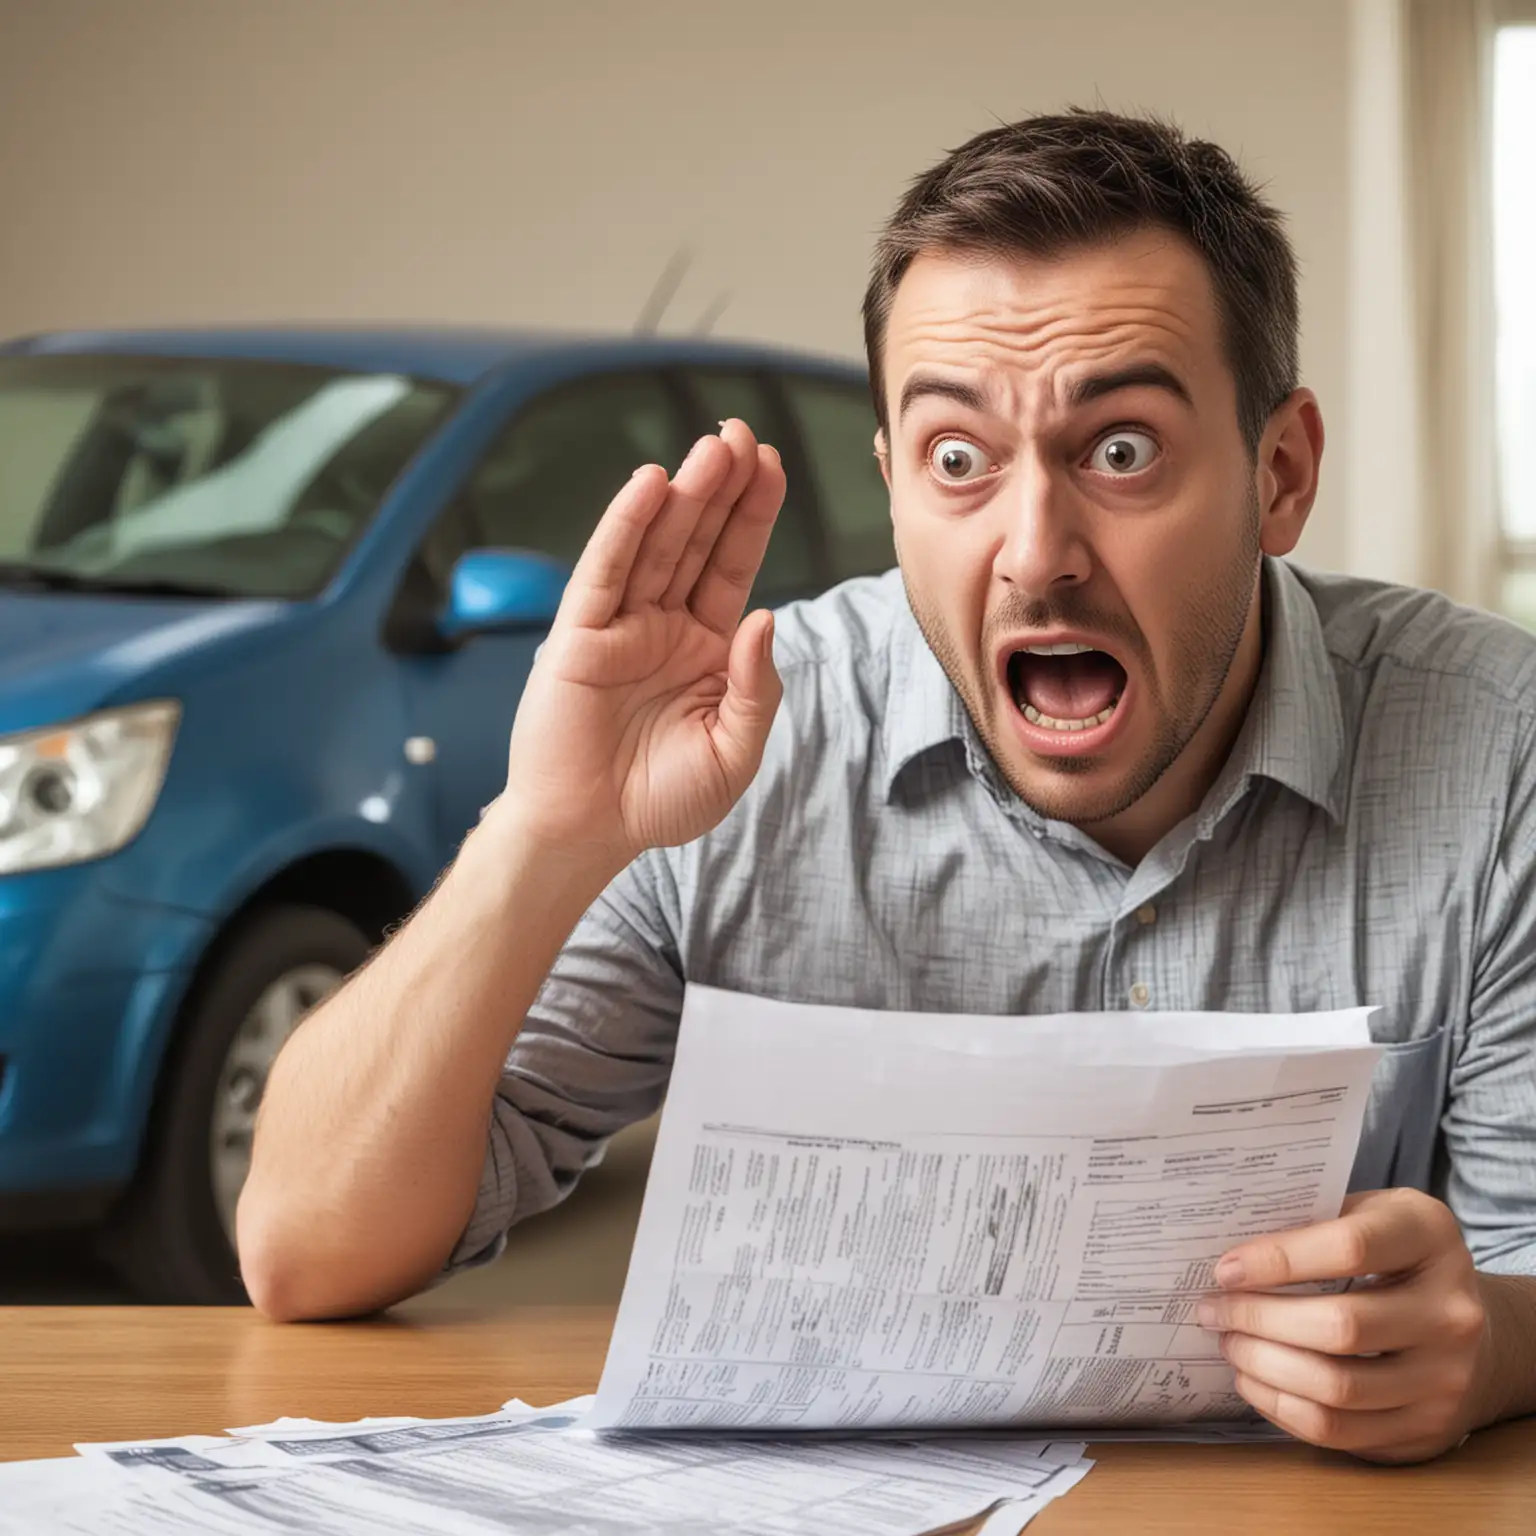 Man getting attacked by their auto insurance bill looking scared
